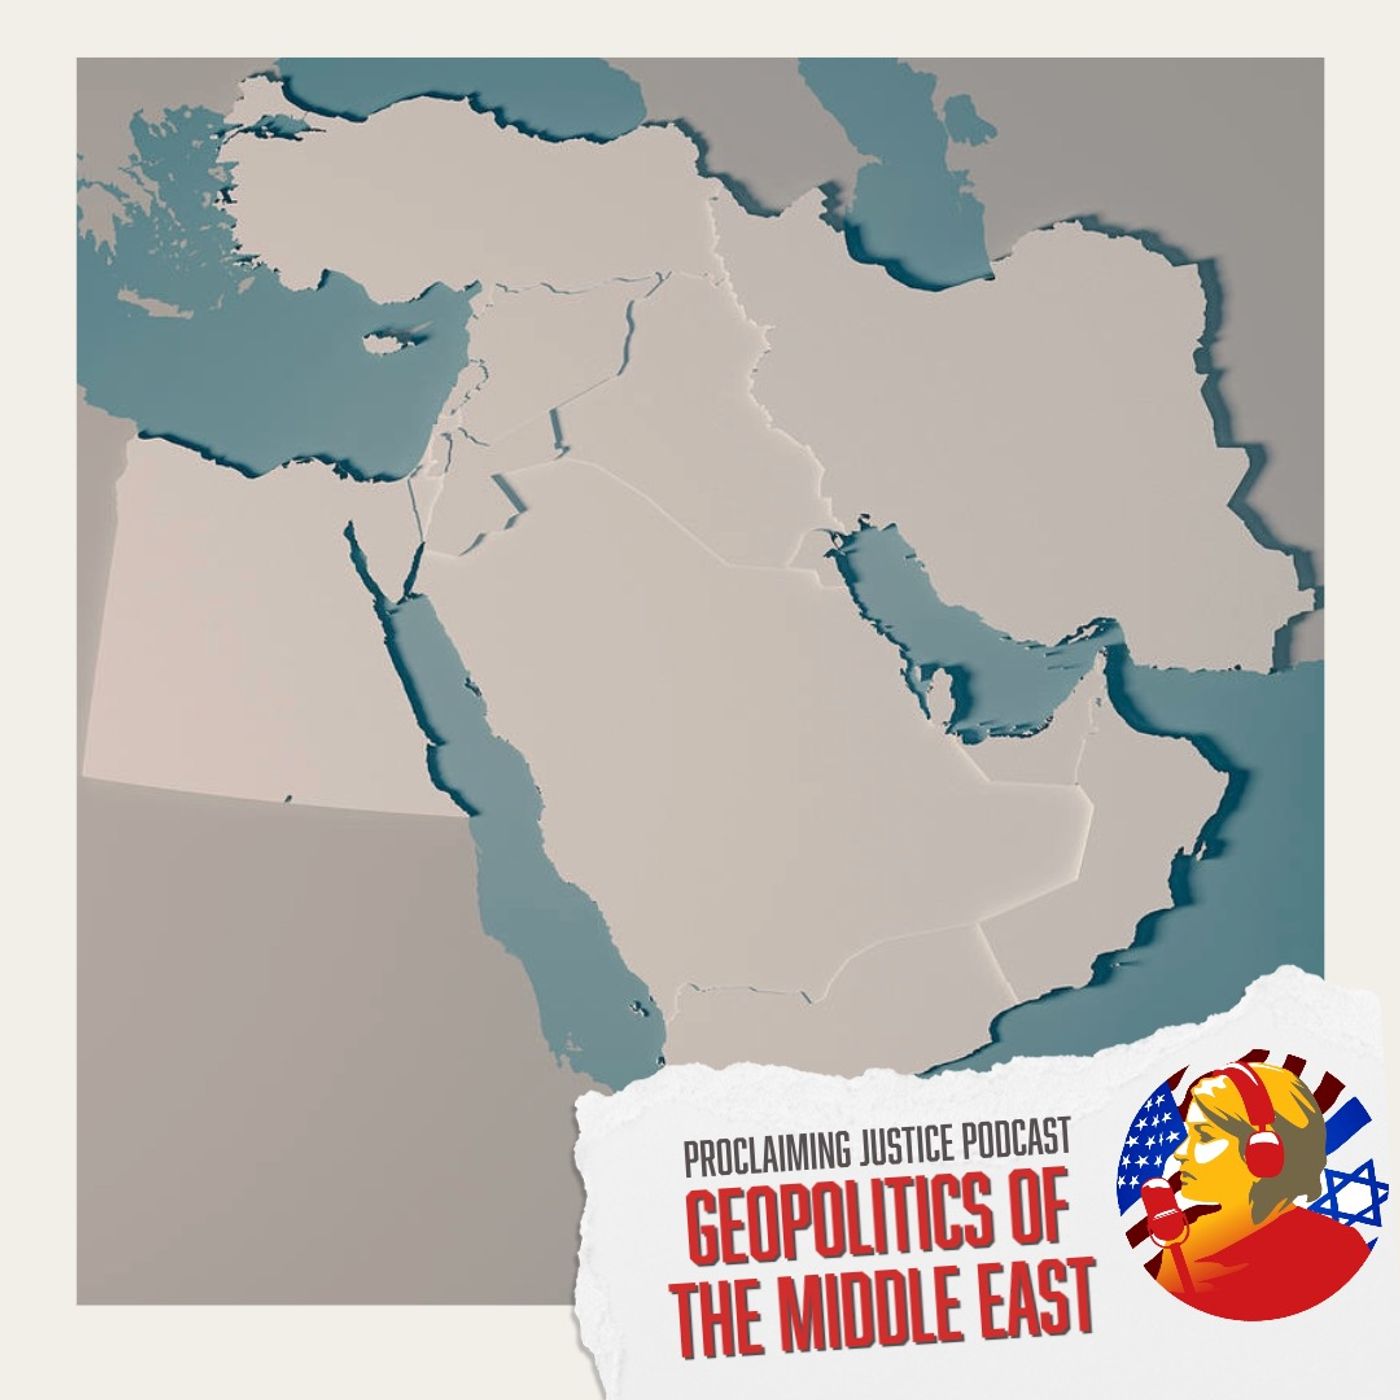 The Fascinating Geopolitics of the Middle East - the latest "Proclaiming Justice" podcast!